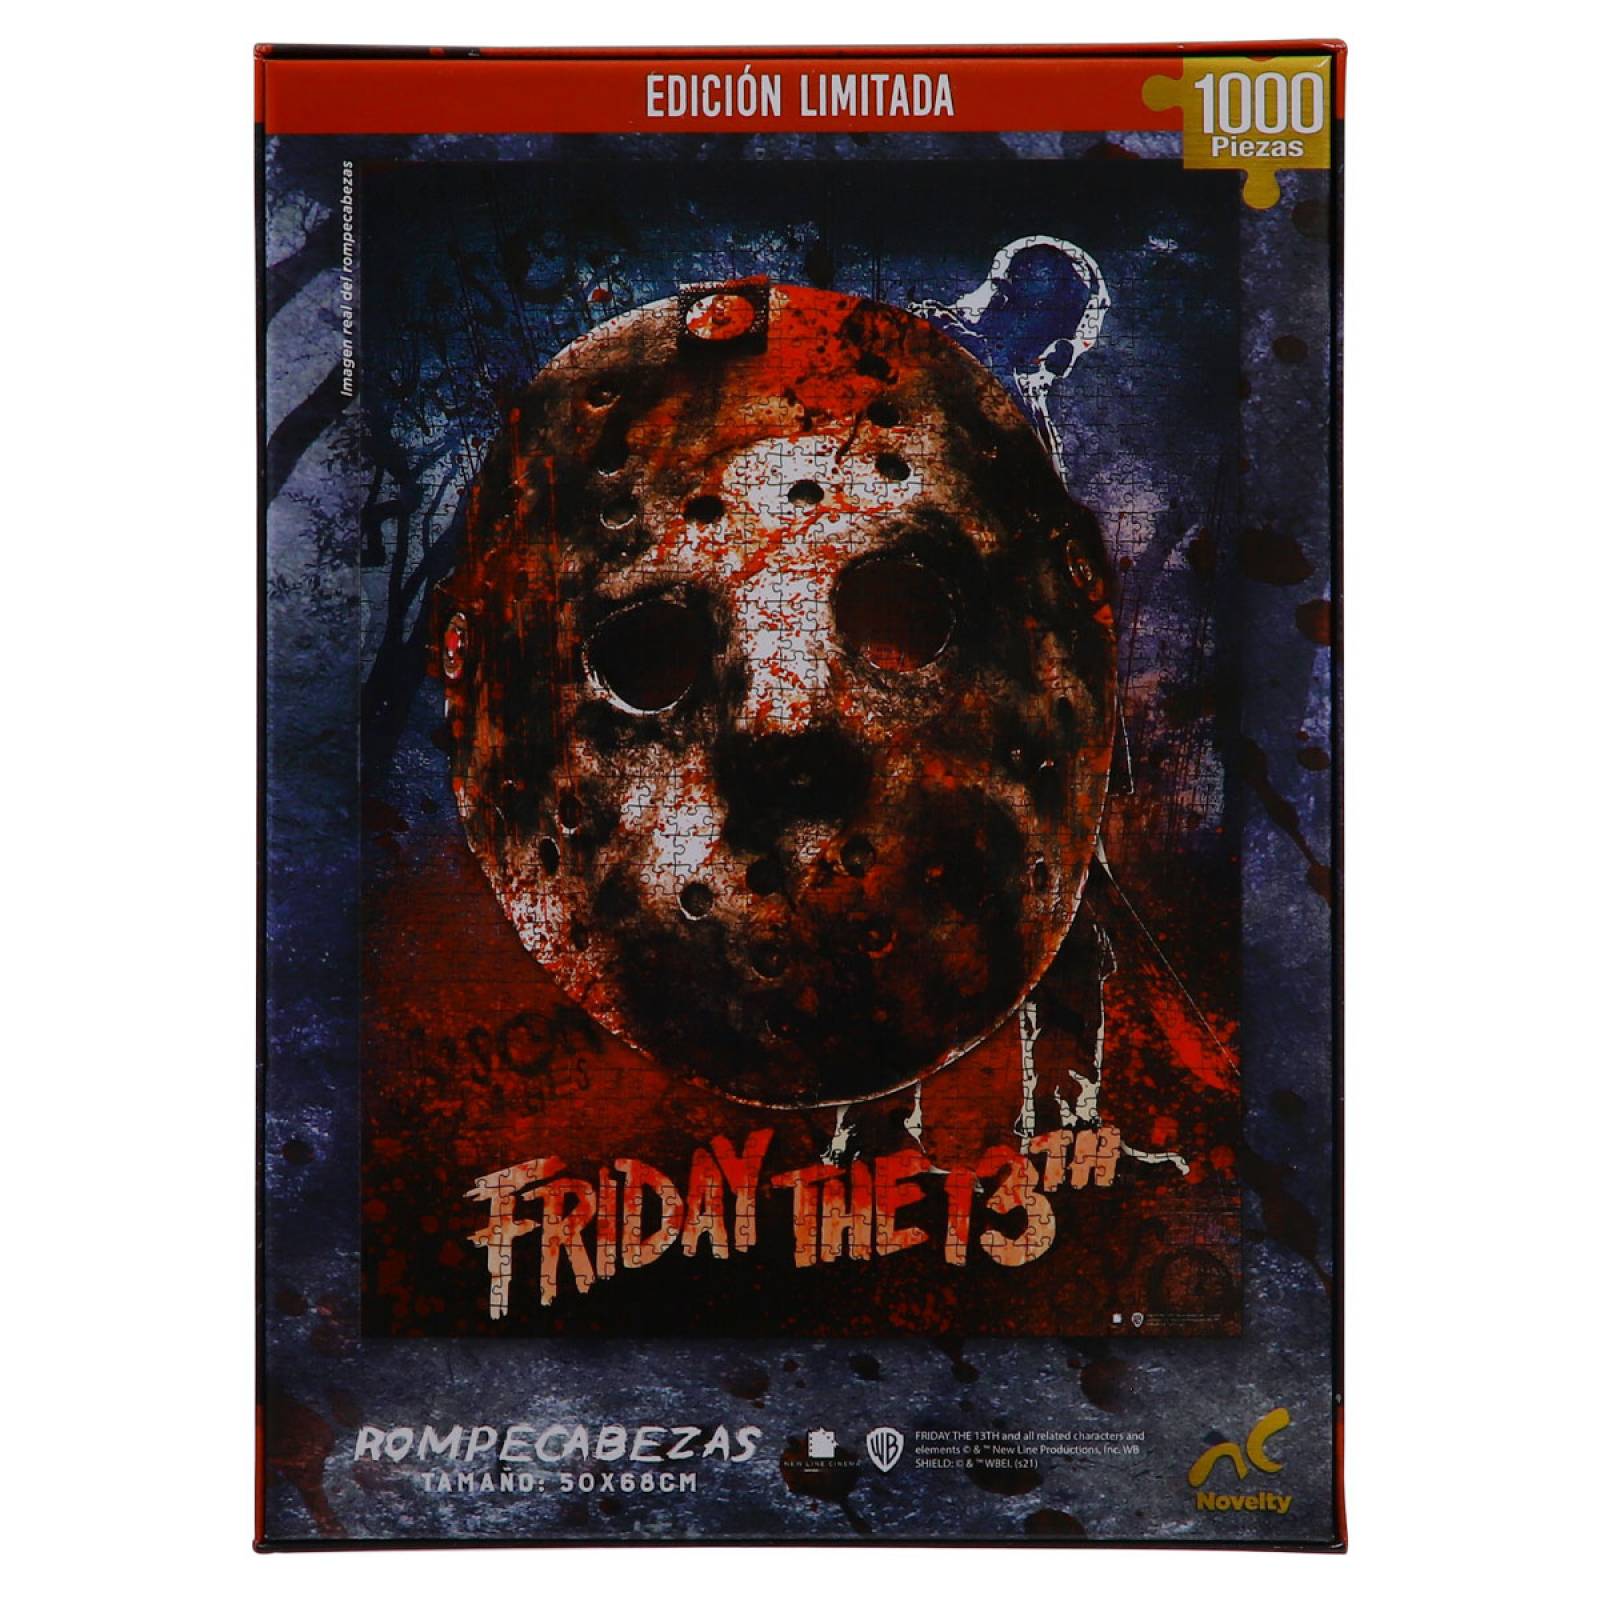 Rompecabezas Coleccionable Friday the 13th 500pz- Novelty